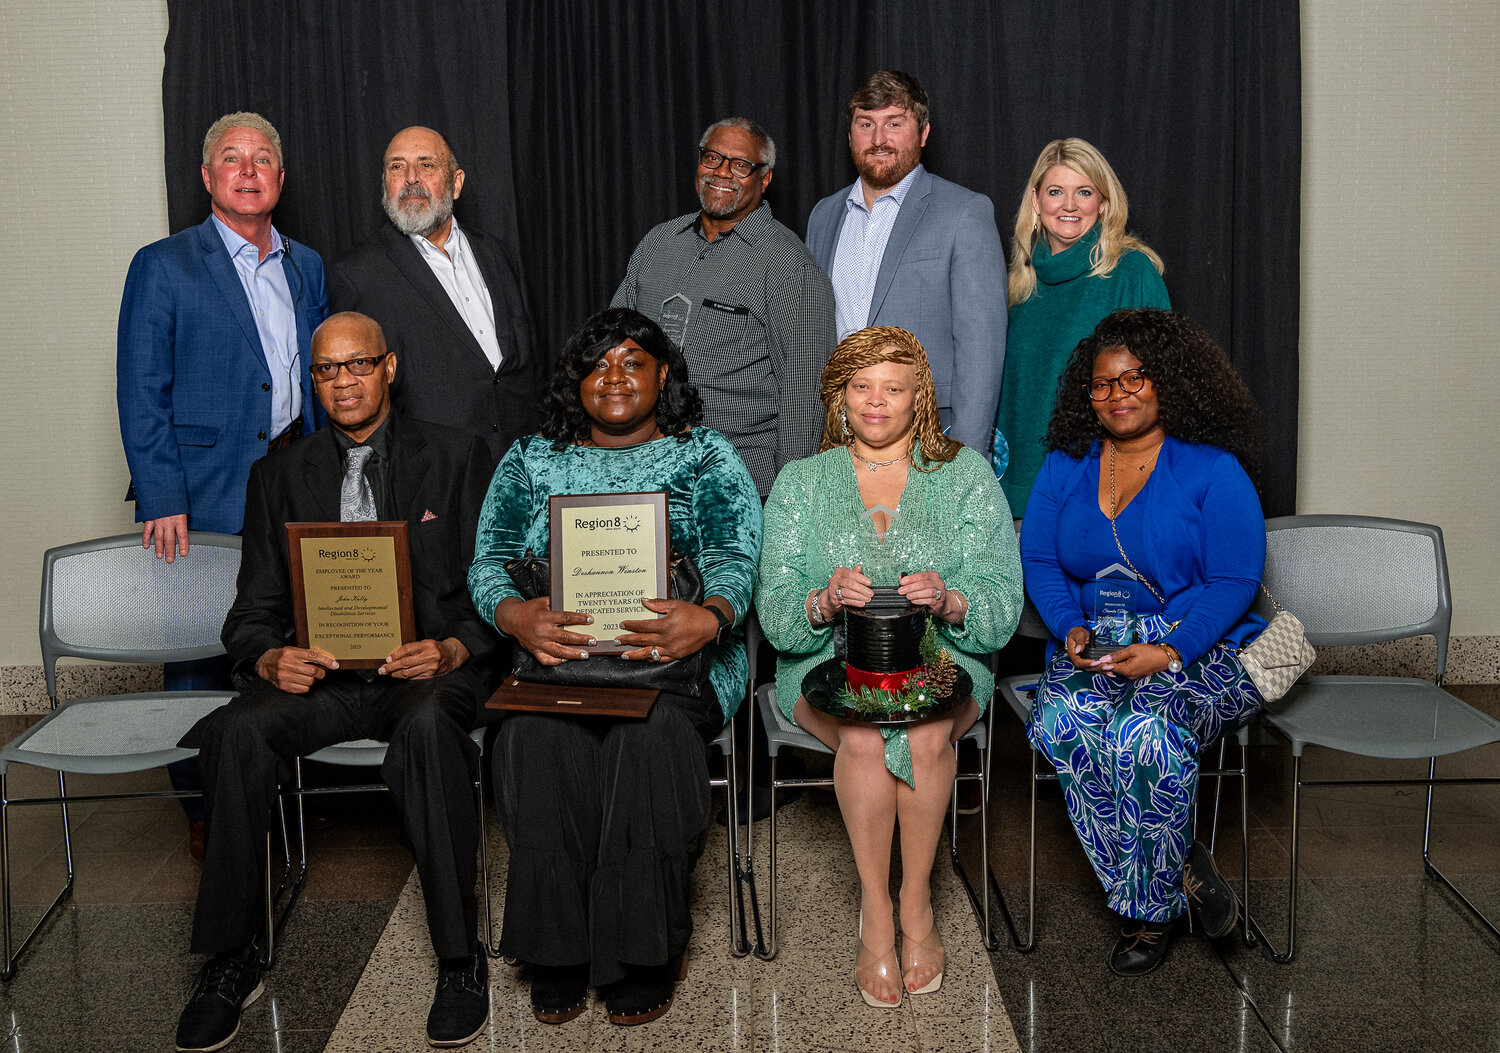 Pictured, front row left to right, are John Kelly, IDD Employee of the Year; Deshannon Winston, 20 Year tenure and Madison County Employee of the Year; Alexia Lucious, 5 year tenure and Shamika Conley, 5 year tenure (Back) Dave Van. Region 8 Executive Director, Dr. Nelson Cauthen, Madison County Region 8 Commissioner; Greg Morgan, 5 year tenure; Wesley Dodd, Power of 8 Award Winner, Region 8 Madison County Administrator; Sonya Summerlin, and Region 8 Madison County Coordinator. Not pictured is  Edward Clarke, Power of 8 Award.